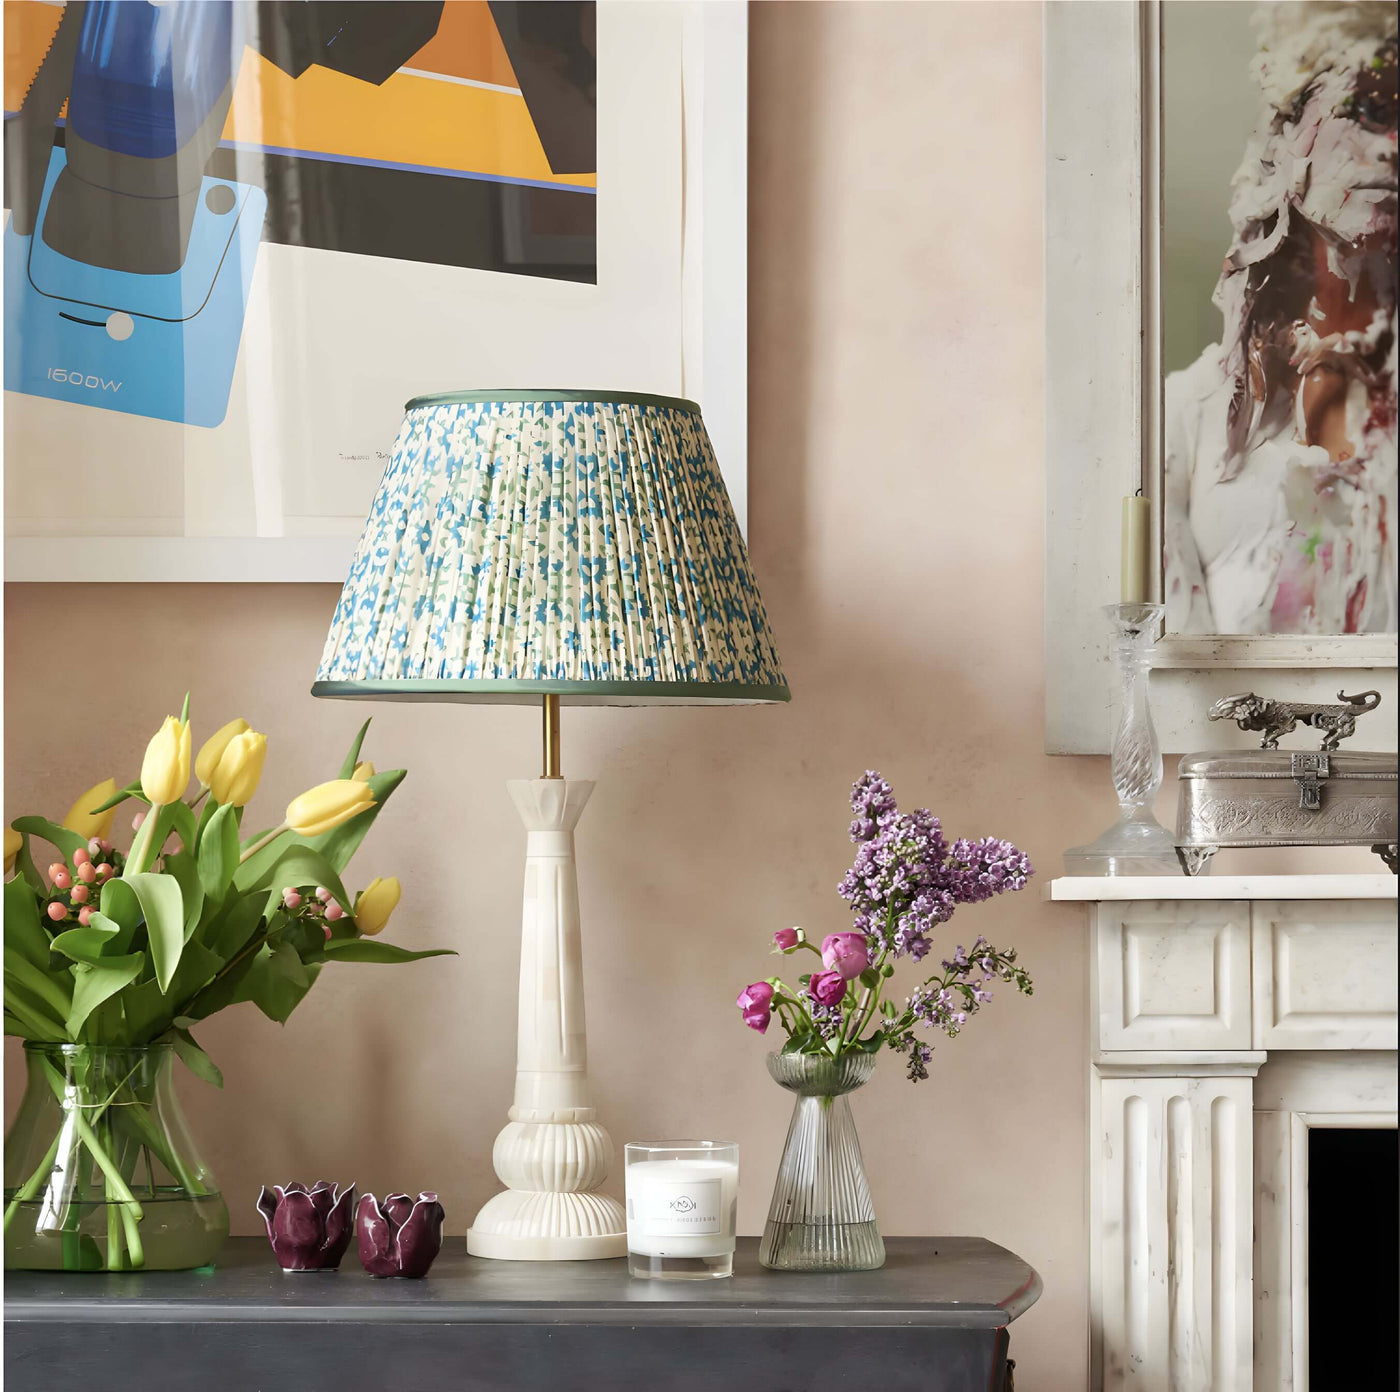 Penny Morrison Bone Lamp with Green and Blue Lampshade